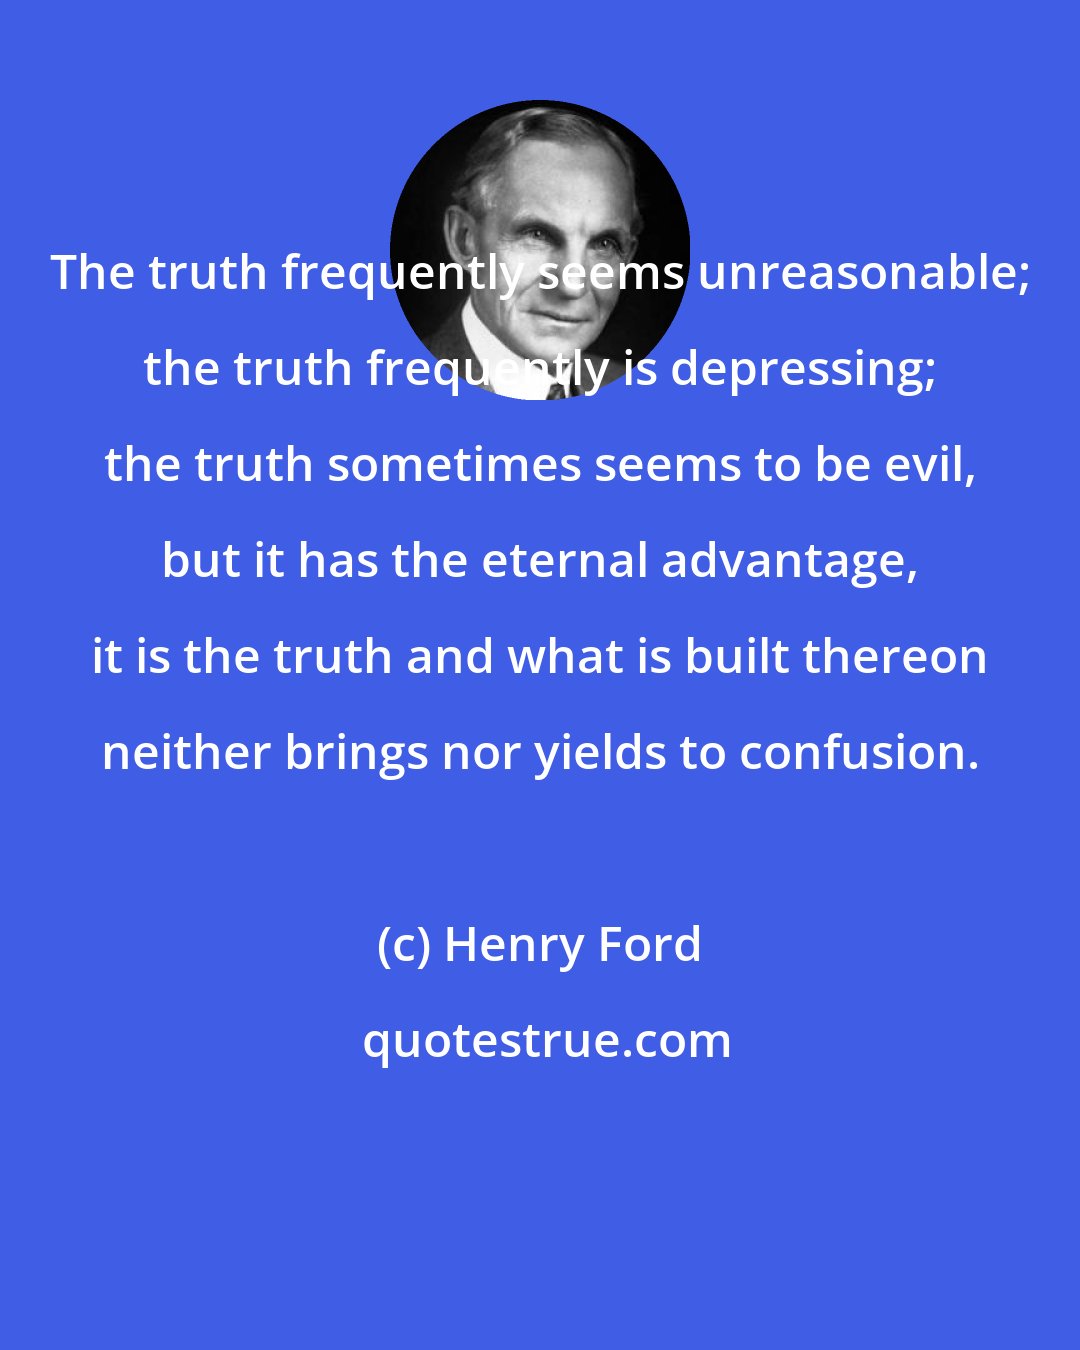 Henry Ford: The truth frequently seems unreasonable; the truth frequently is depressing; the truth sometimes seems to be evil, but it has the eternal advantage, it is the truth and what is built thereon neither brings nor yields to confusion.